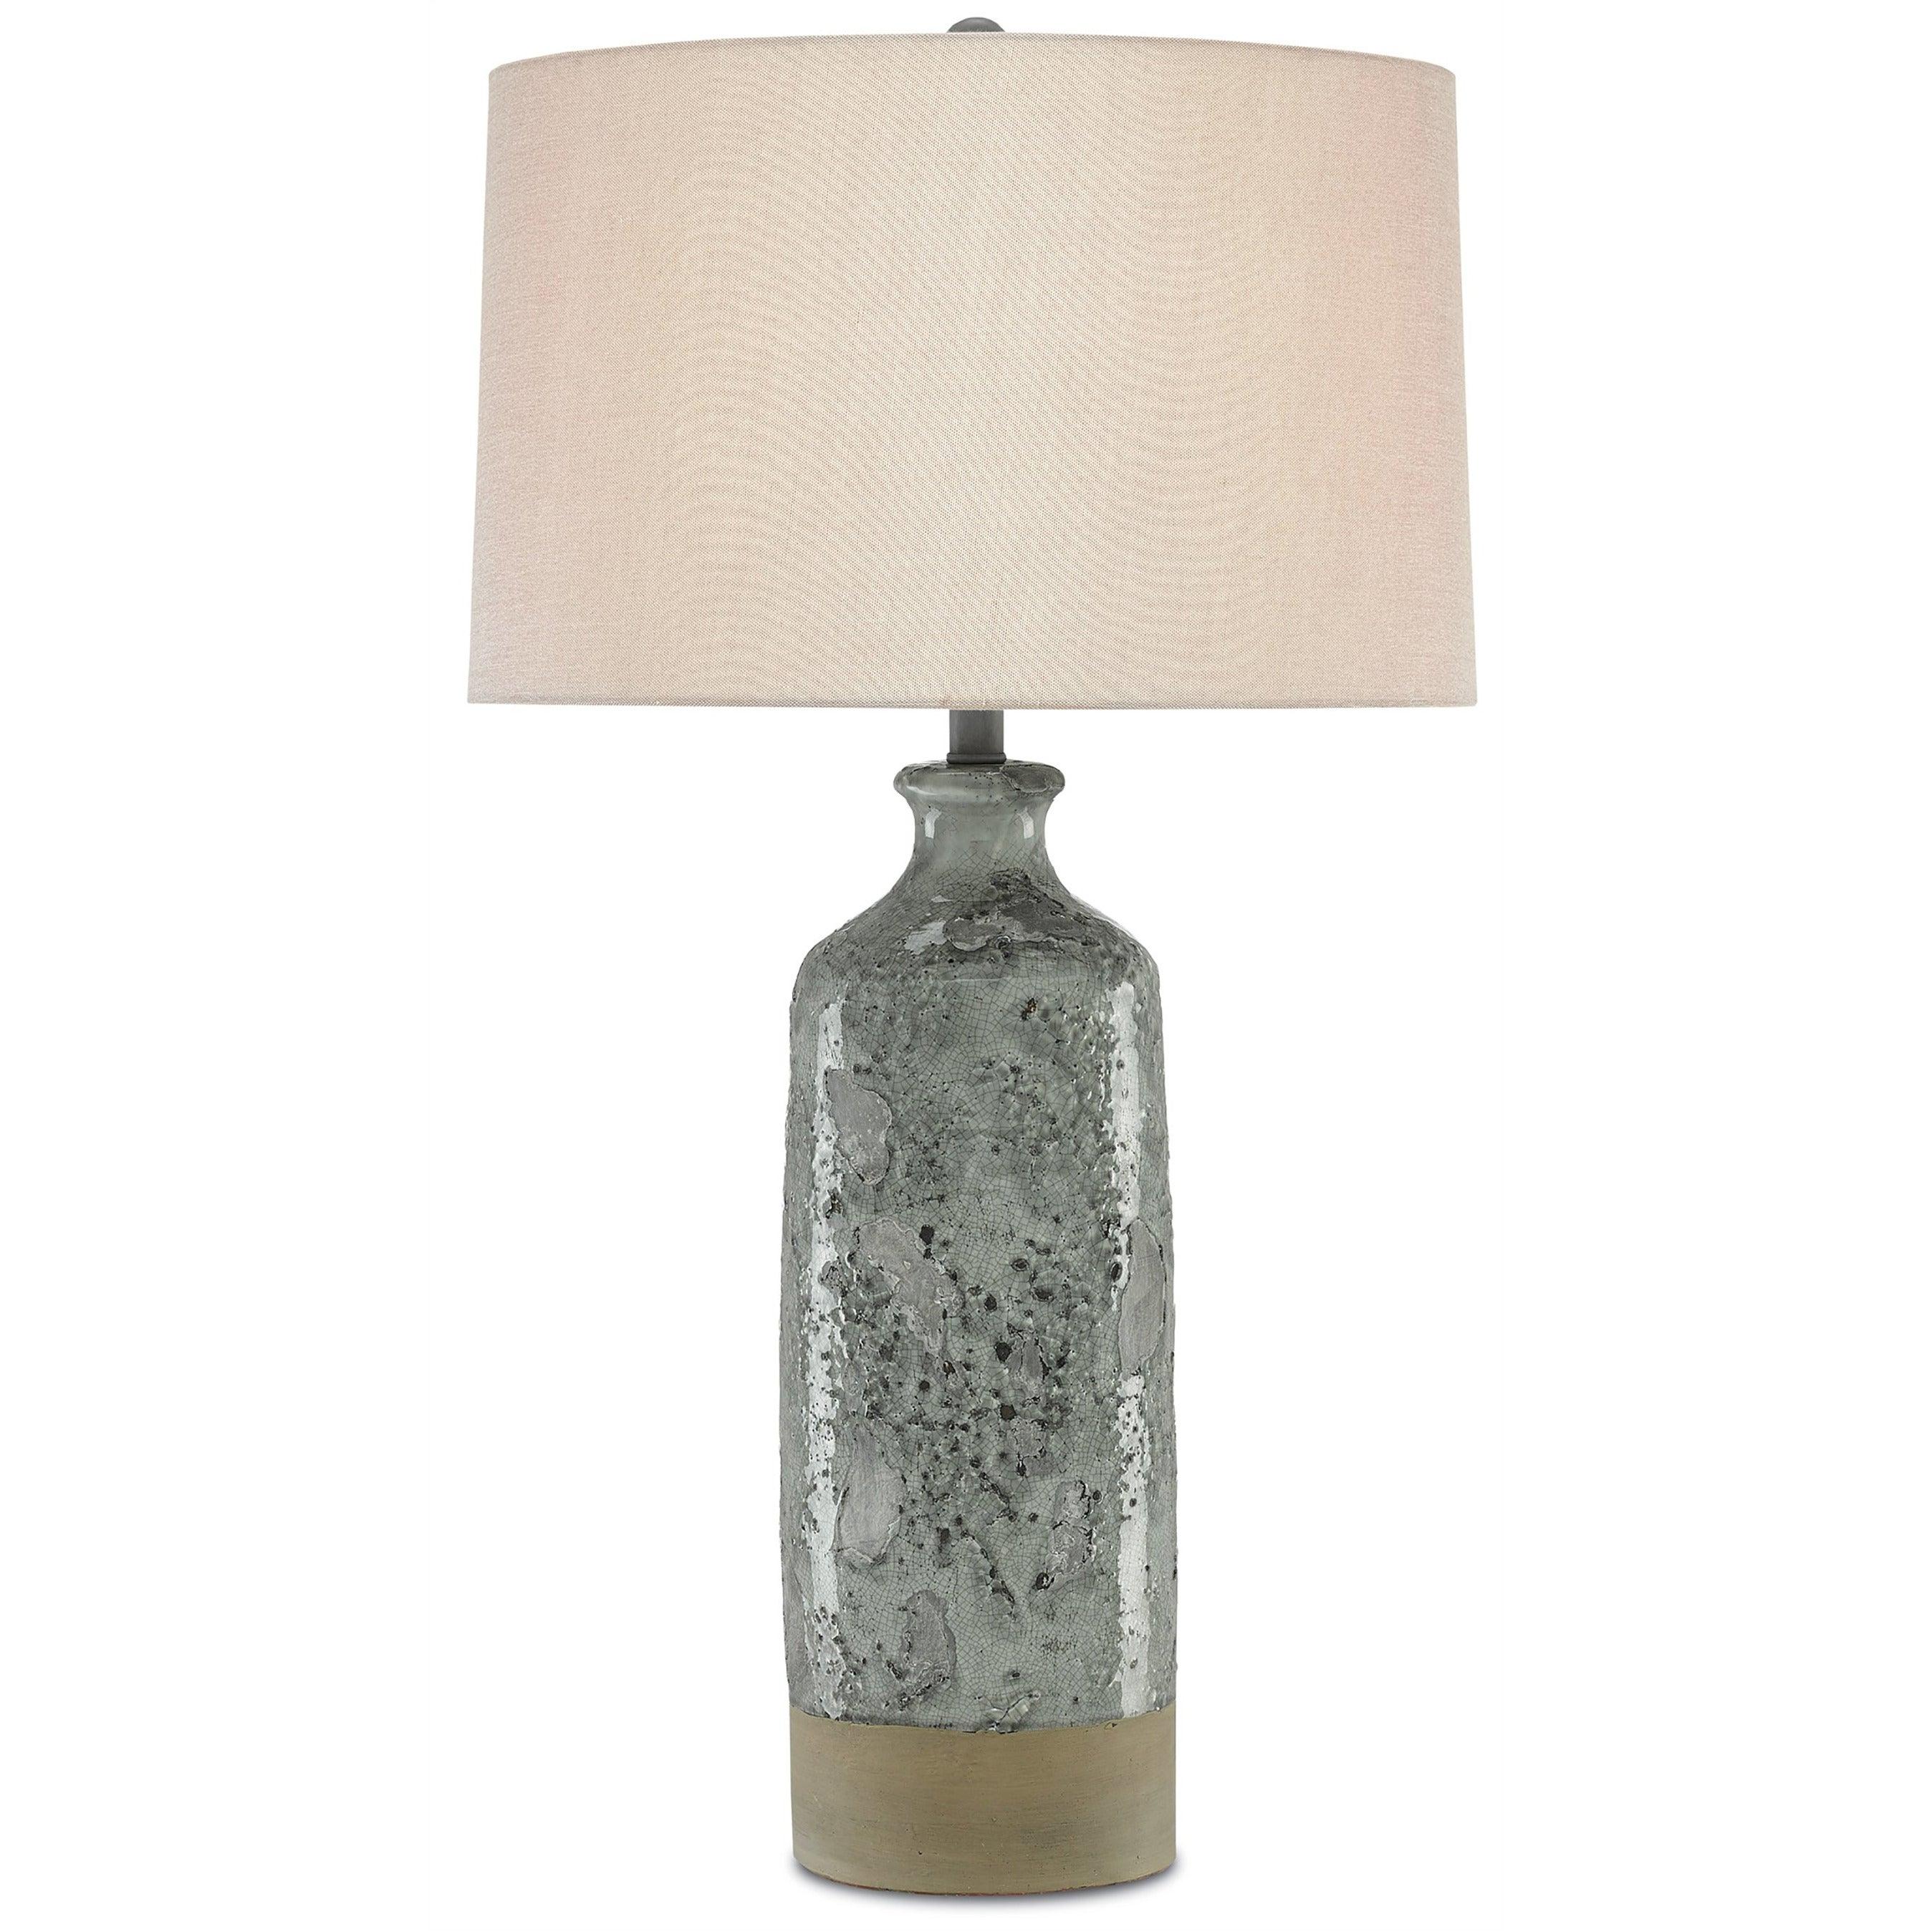 Currey and Company - Stargazer Table Lamp - 6000-0208 | Montreal Lighting & Hardware